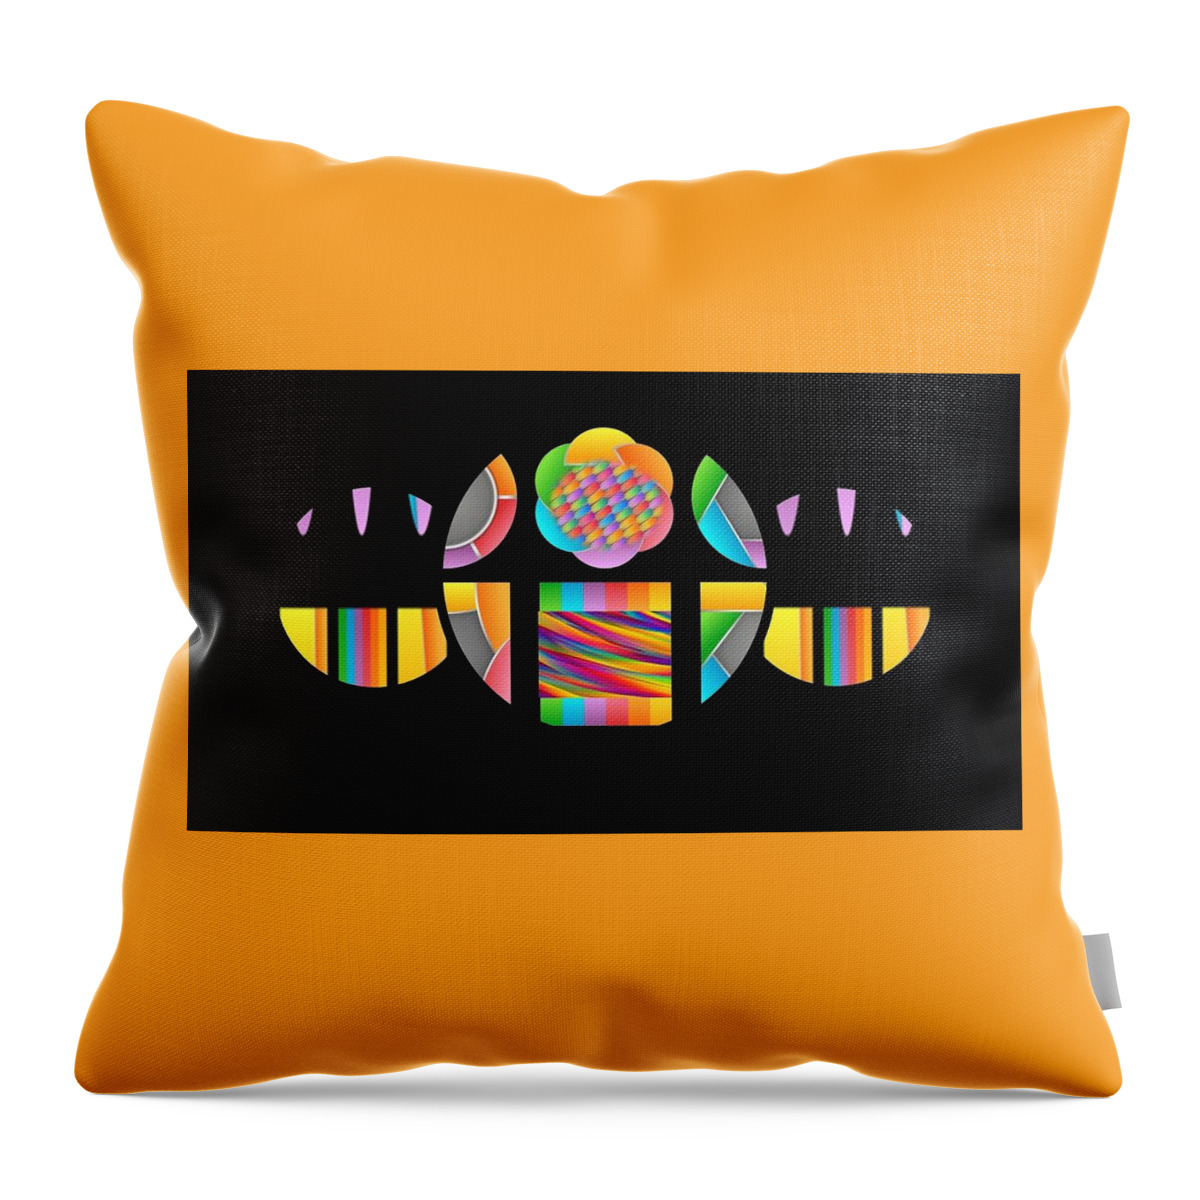 Abstract Throw Pillow featuring the digital art Abstraction by Nancy Ayanna Wyatt